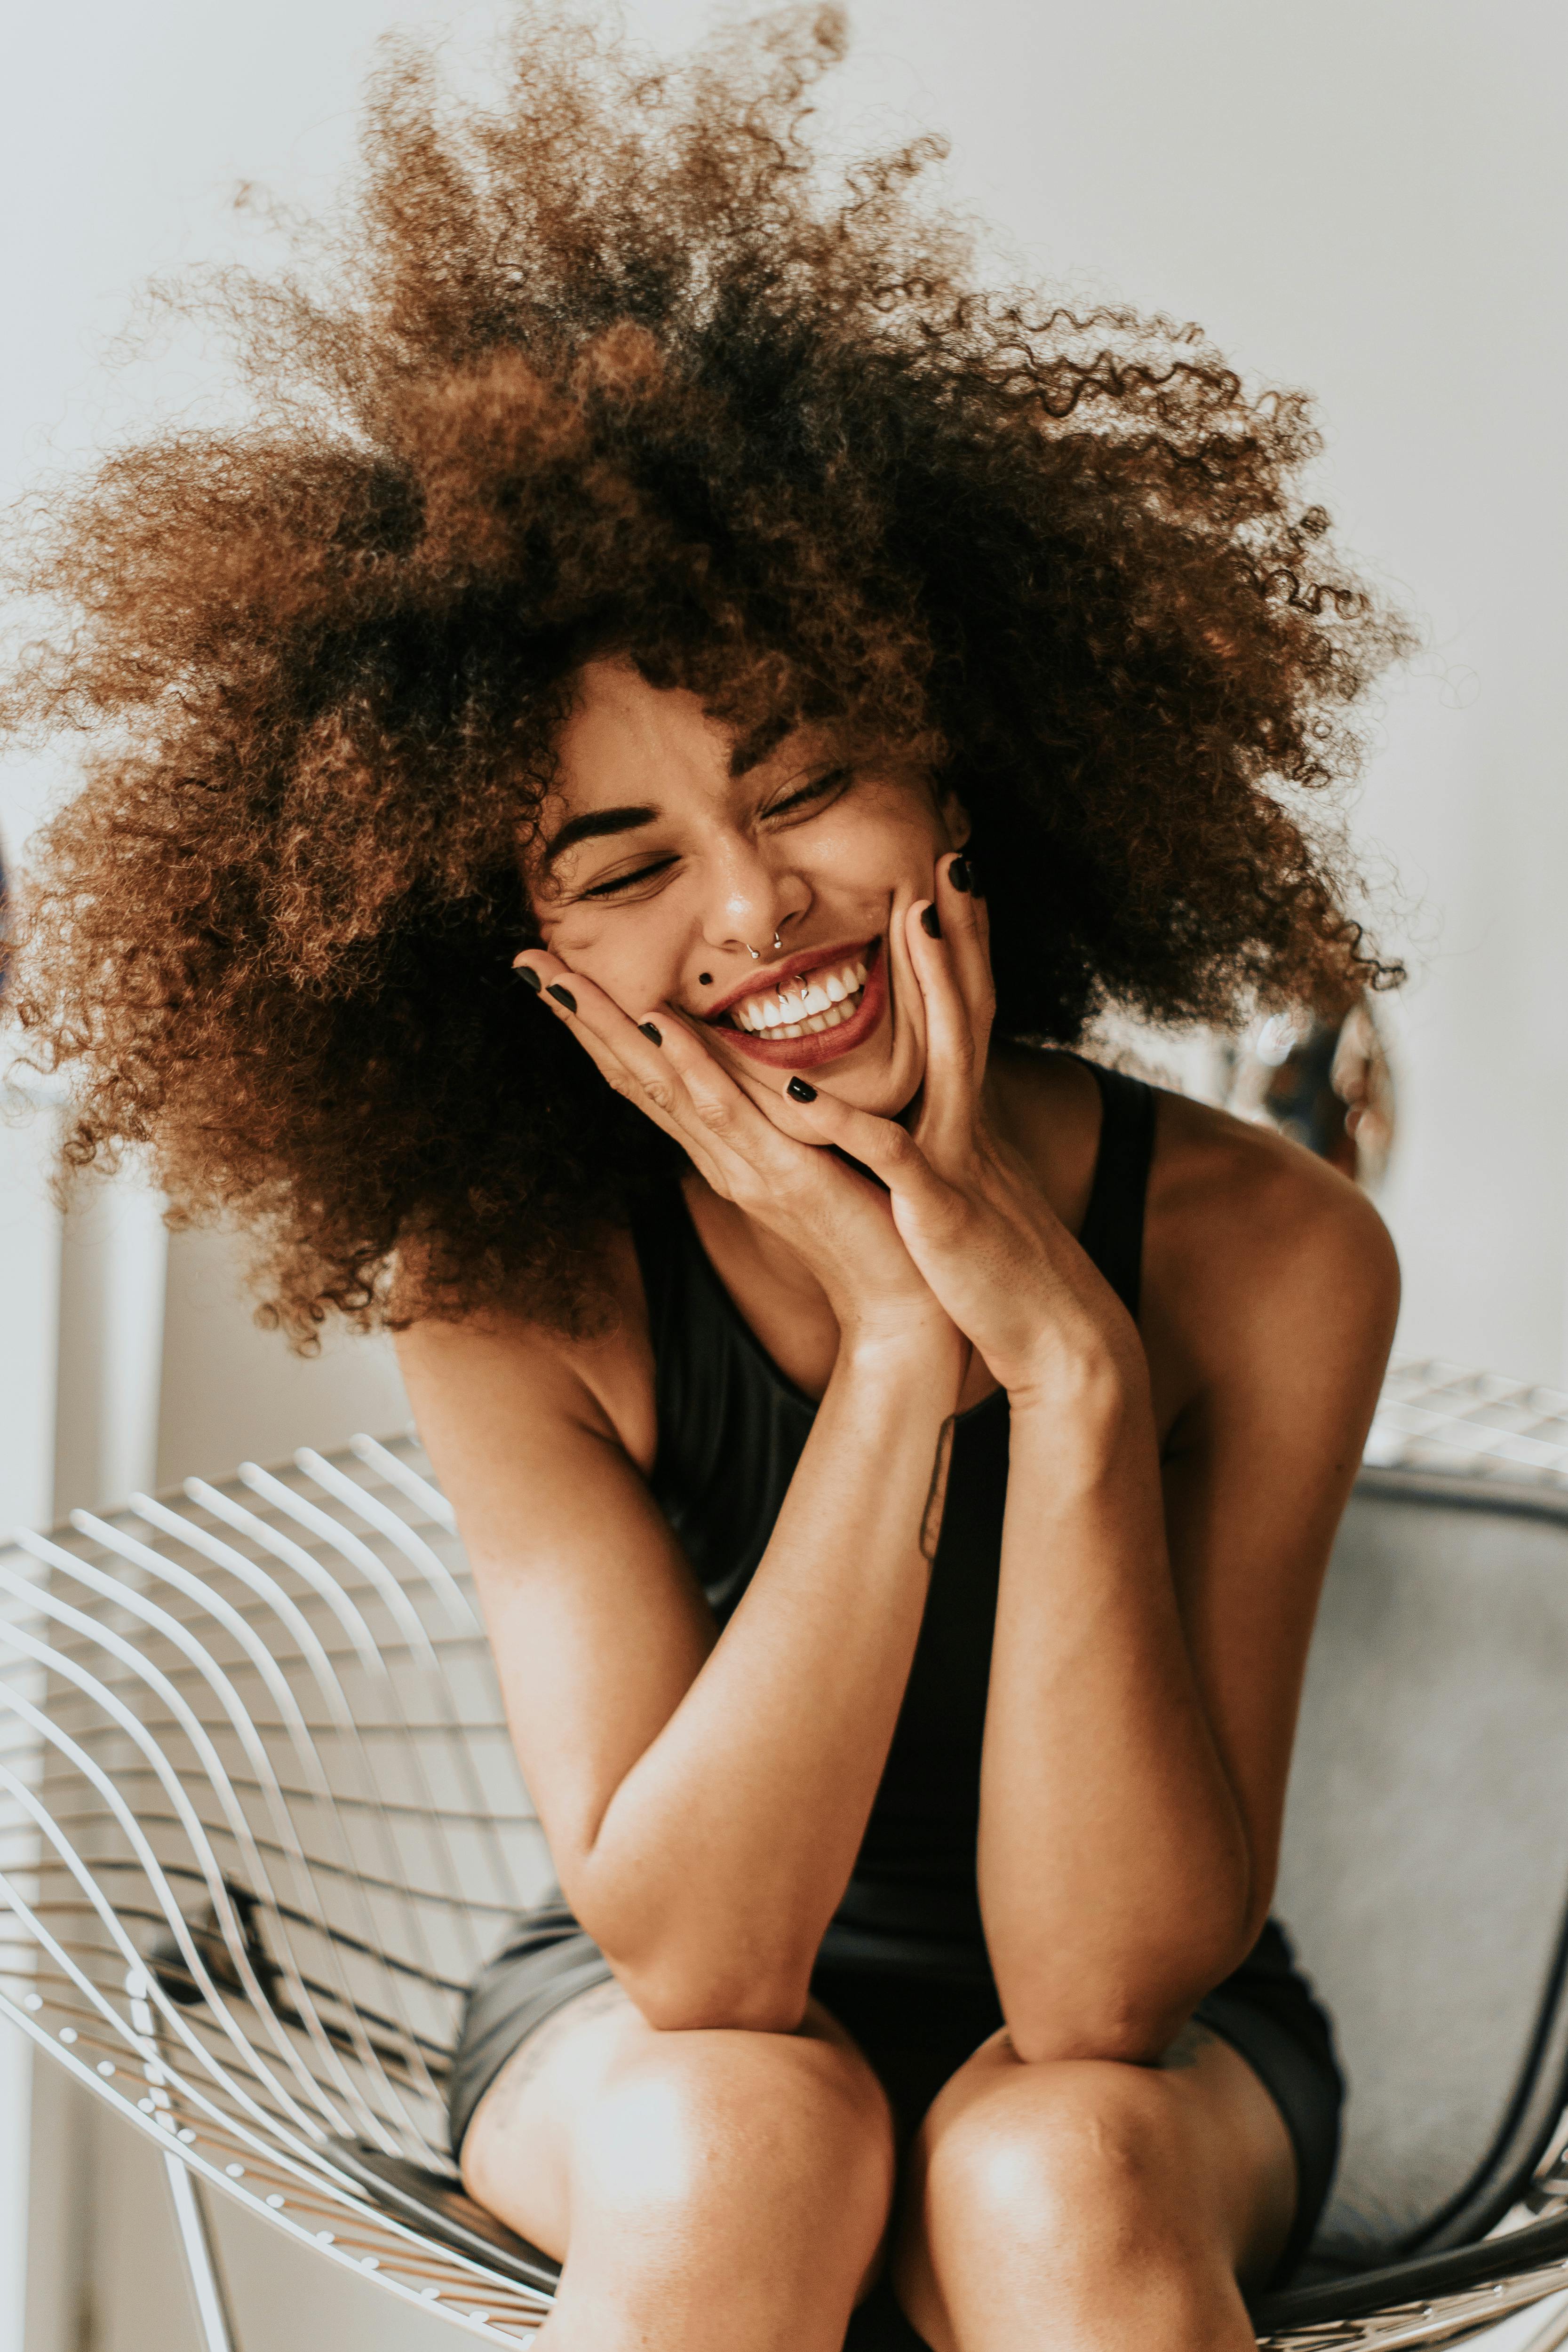 An excited, smiling woman holding her face | Source: Pexels